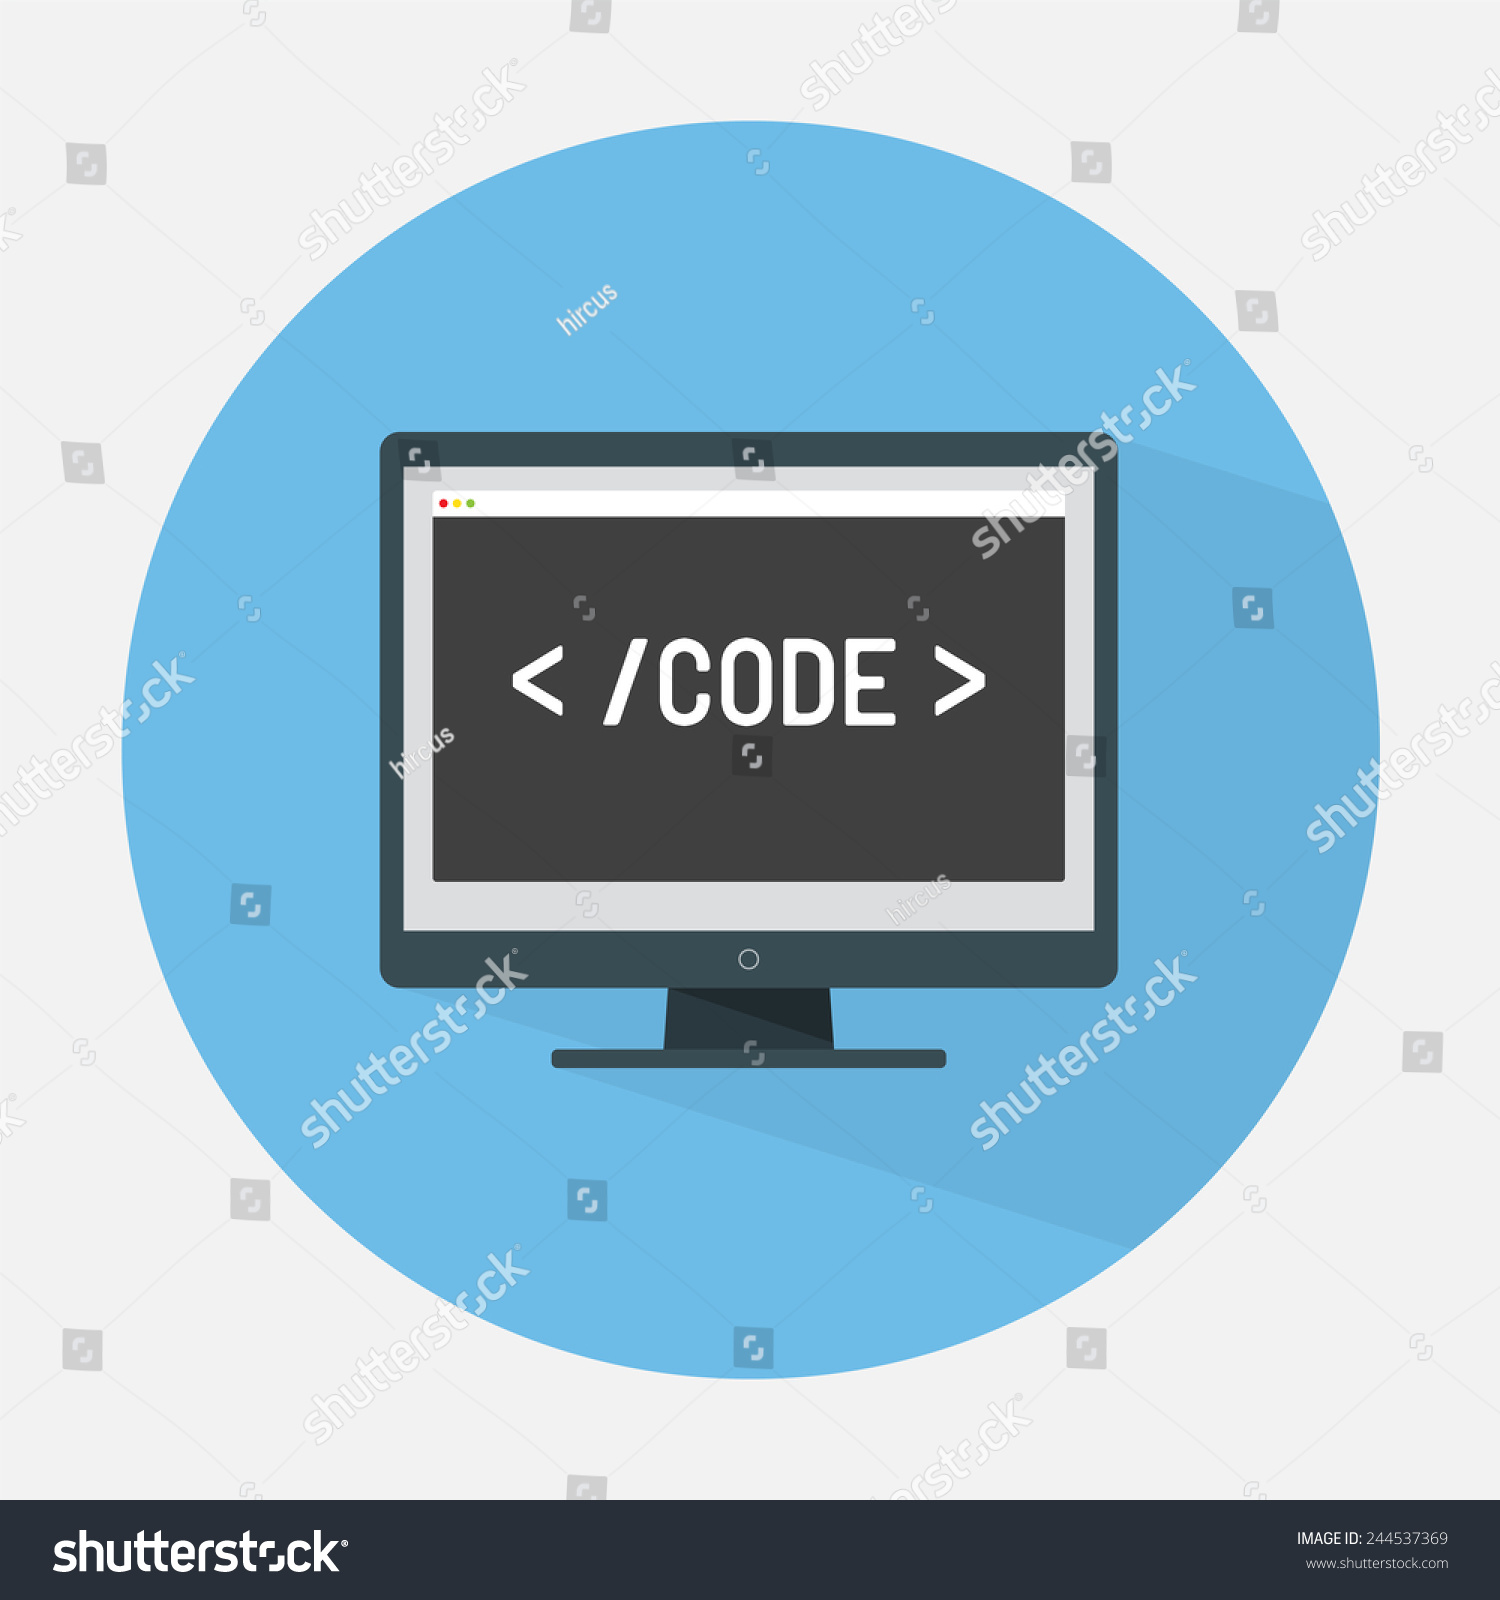 Download Monitor Coding Editor Flat Icon Vector Stock Vector 244537369 - Shutterstock